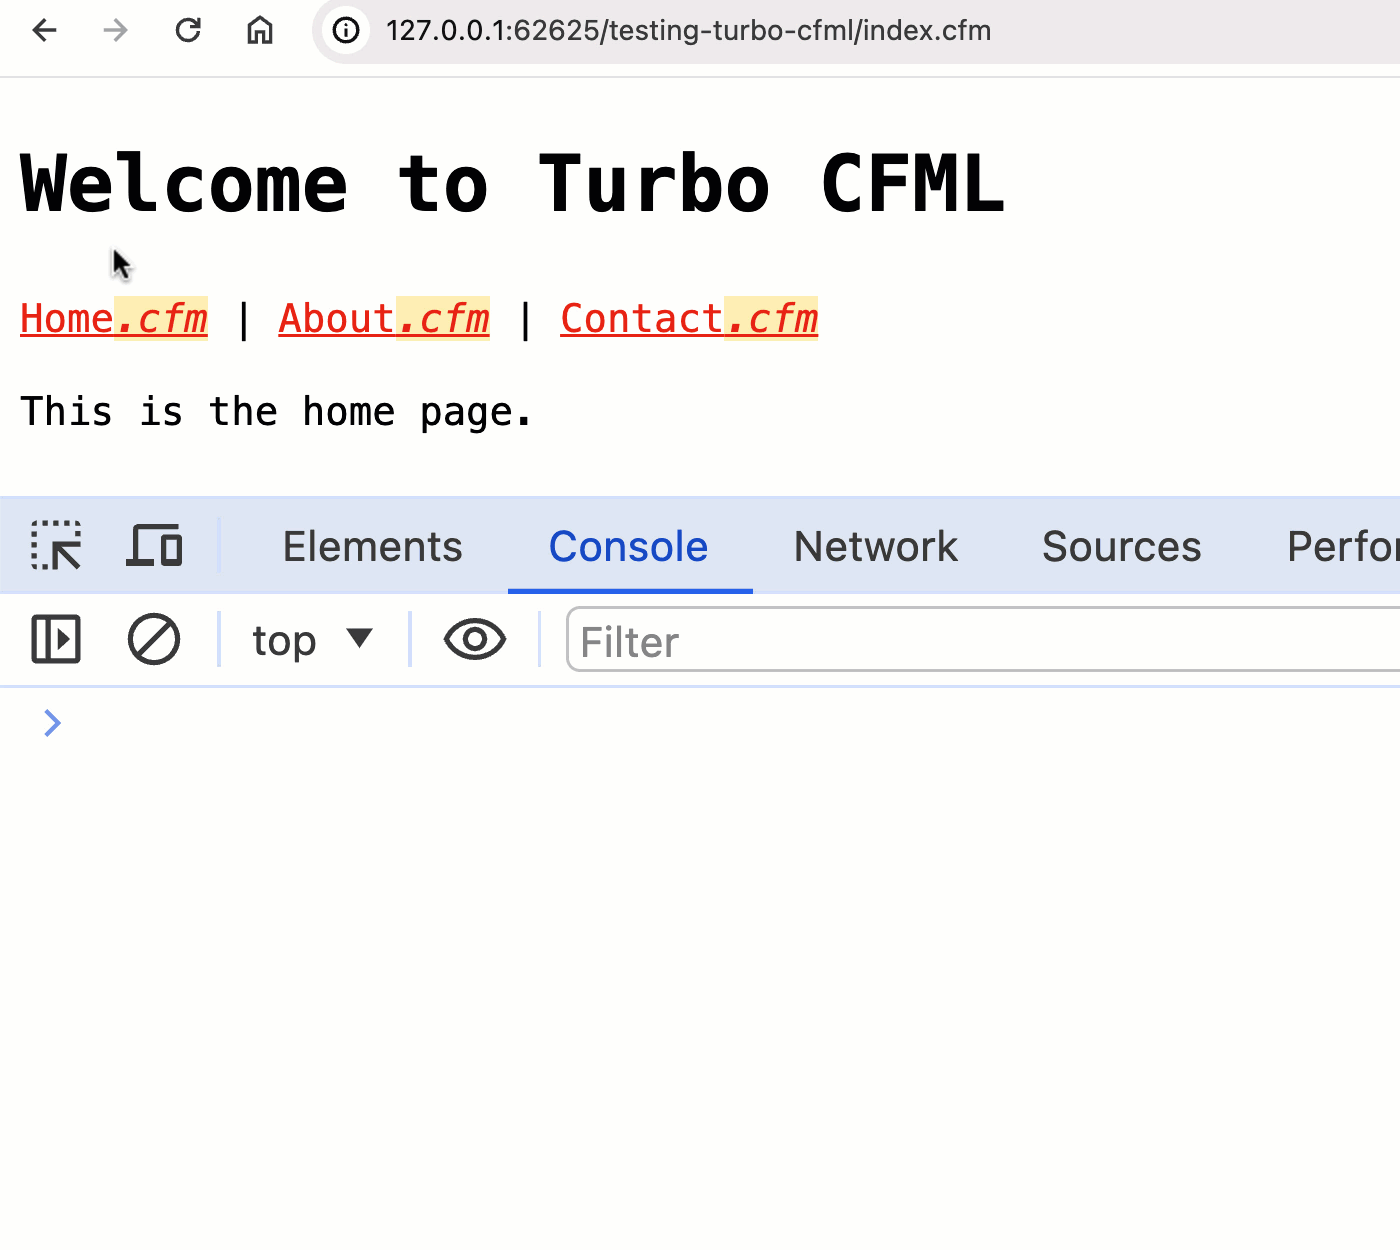 Turbo CFML library applying Hotwire Turbo to CFM file extensions.